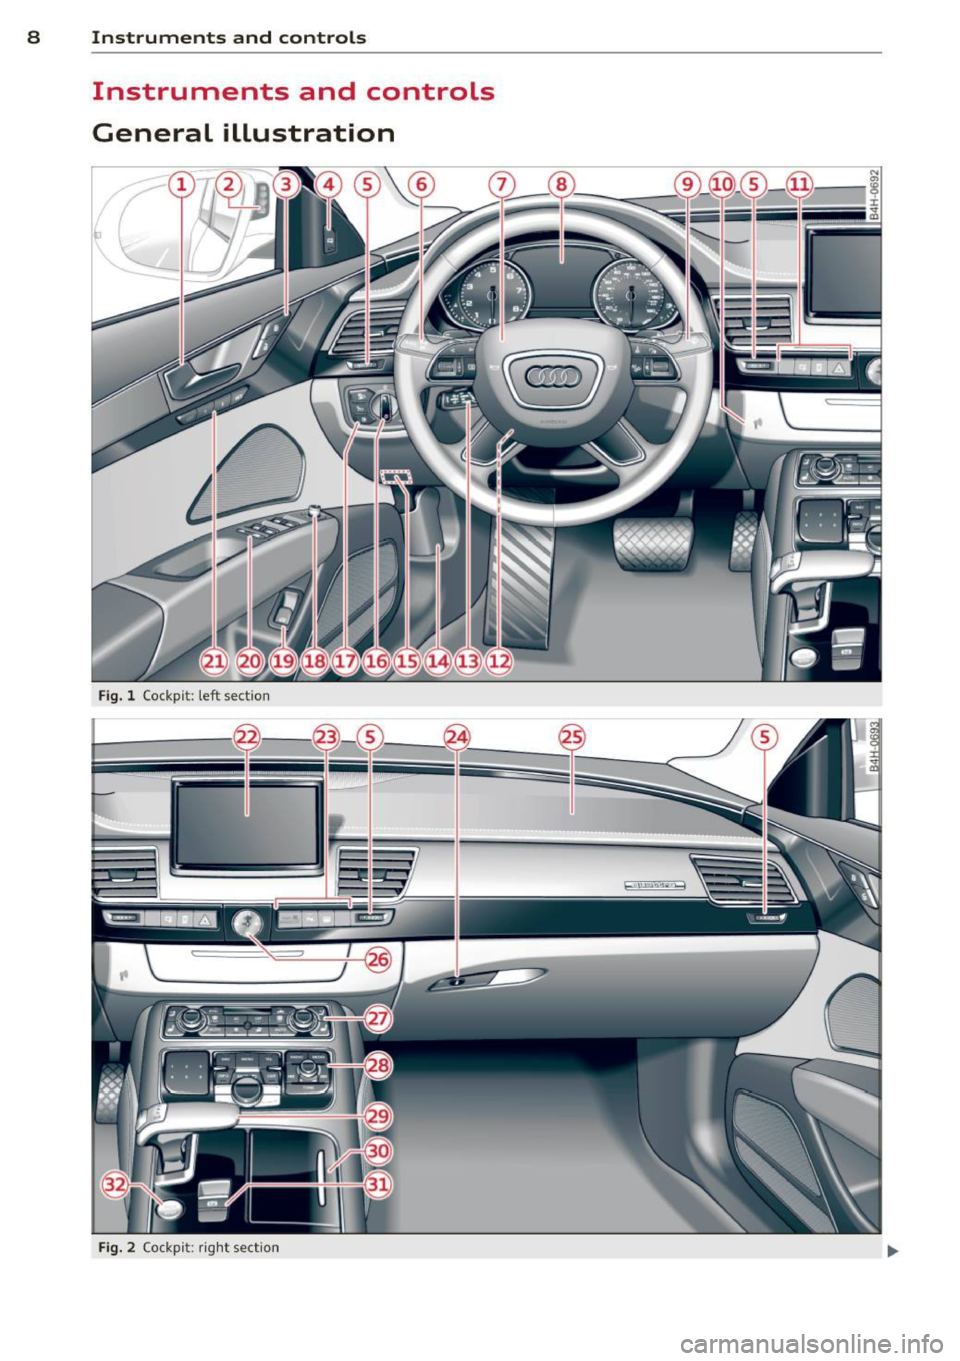 AUDI A8 2011  Owners Manual 8  Instruments and  controls 
Instruments  and  controls 
General  illustration 
Fig. l Cockp it:  left  sect io n 
Fig. 2 Co ck pi t: ri ght  sect io n  